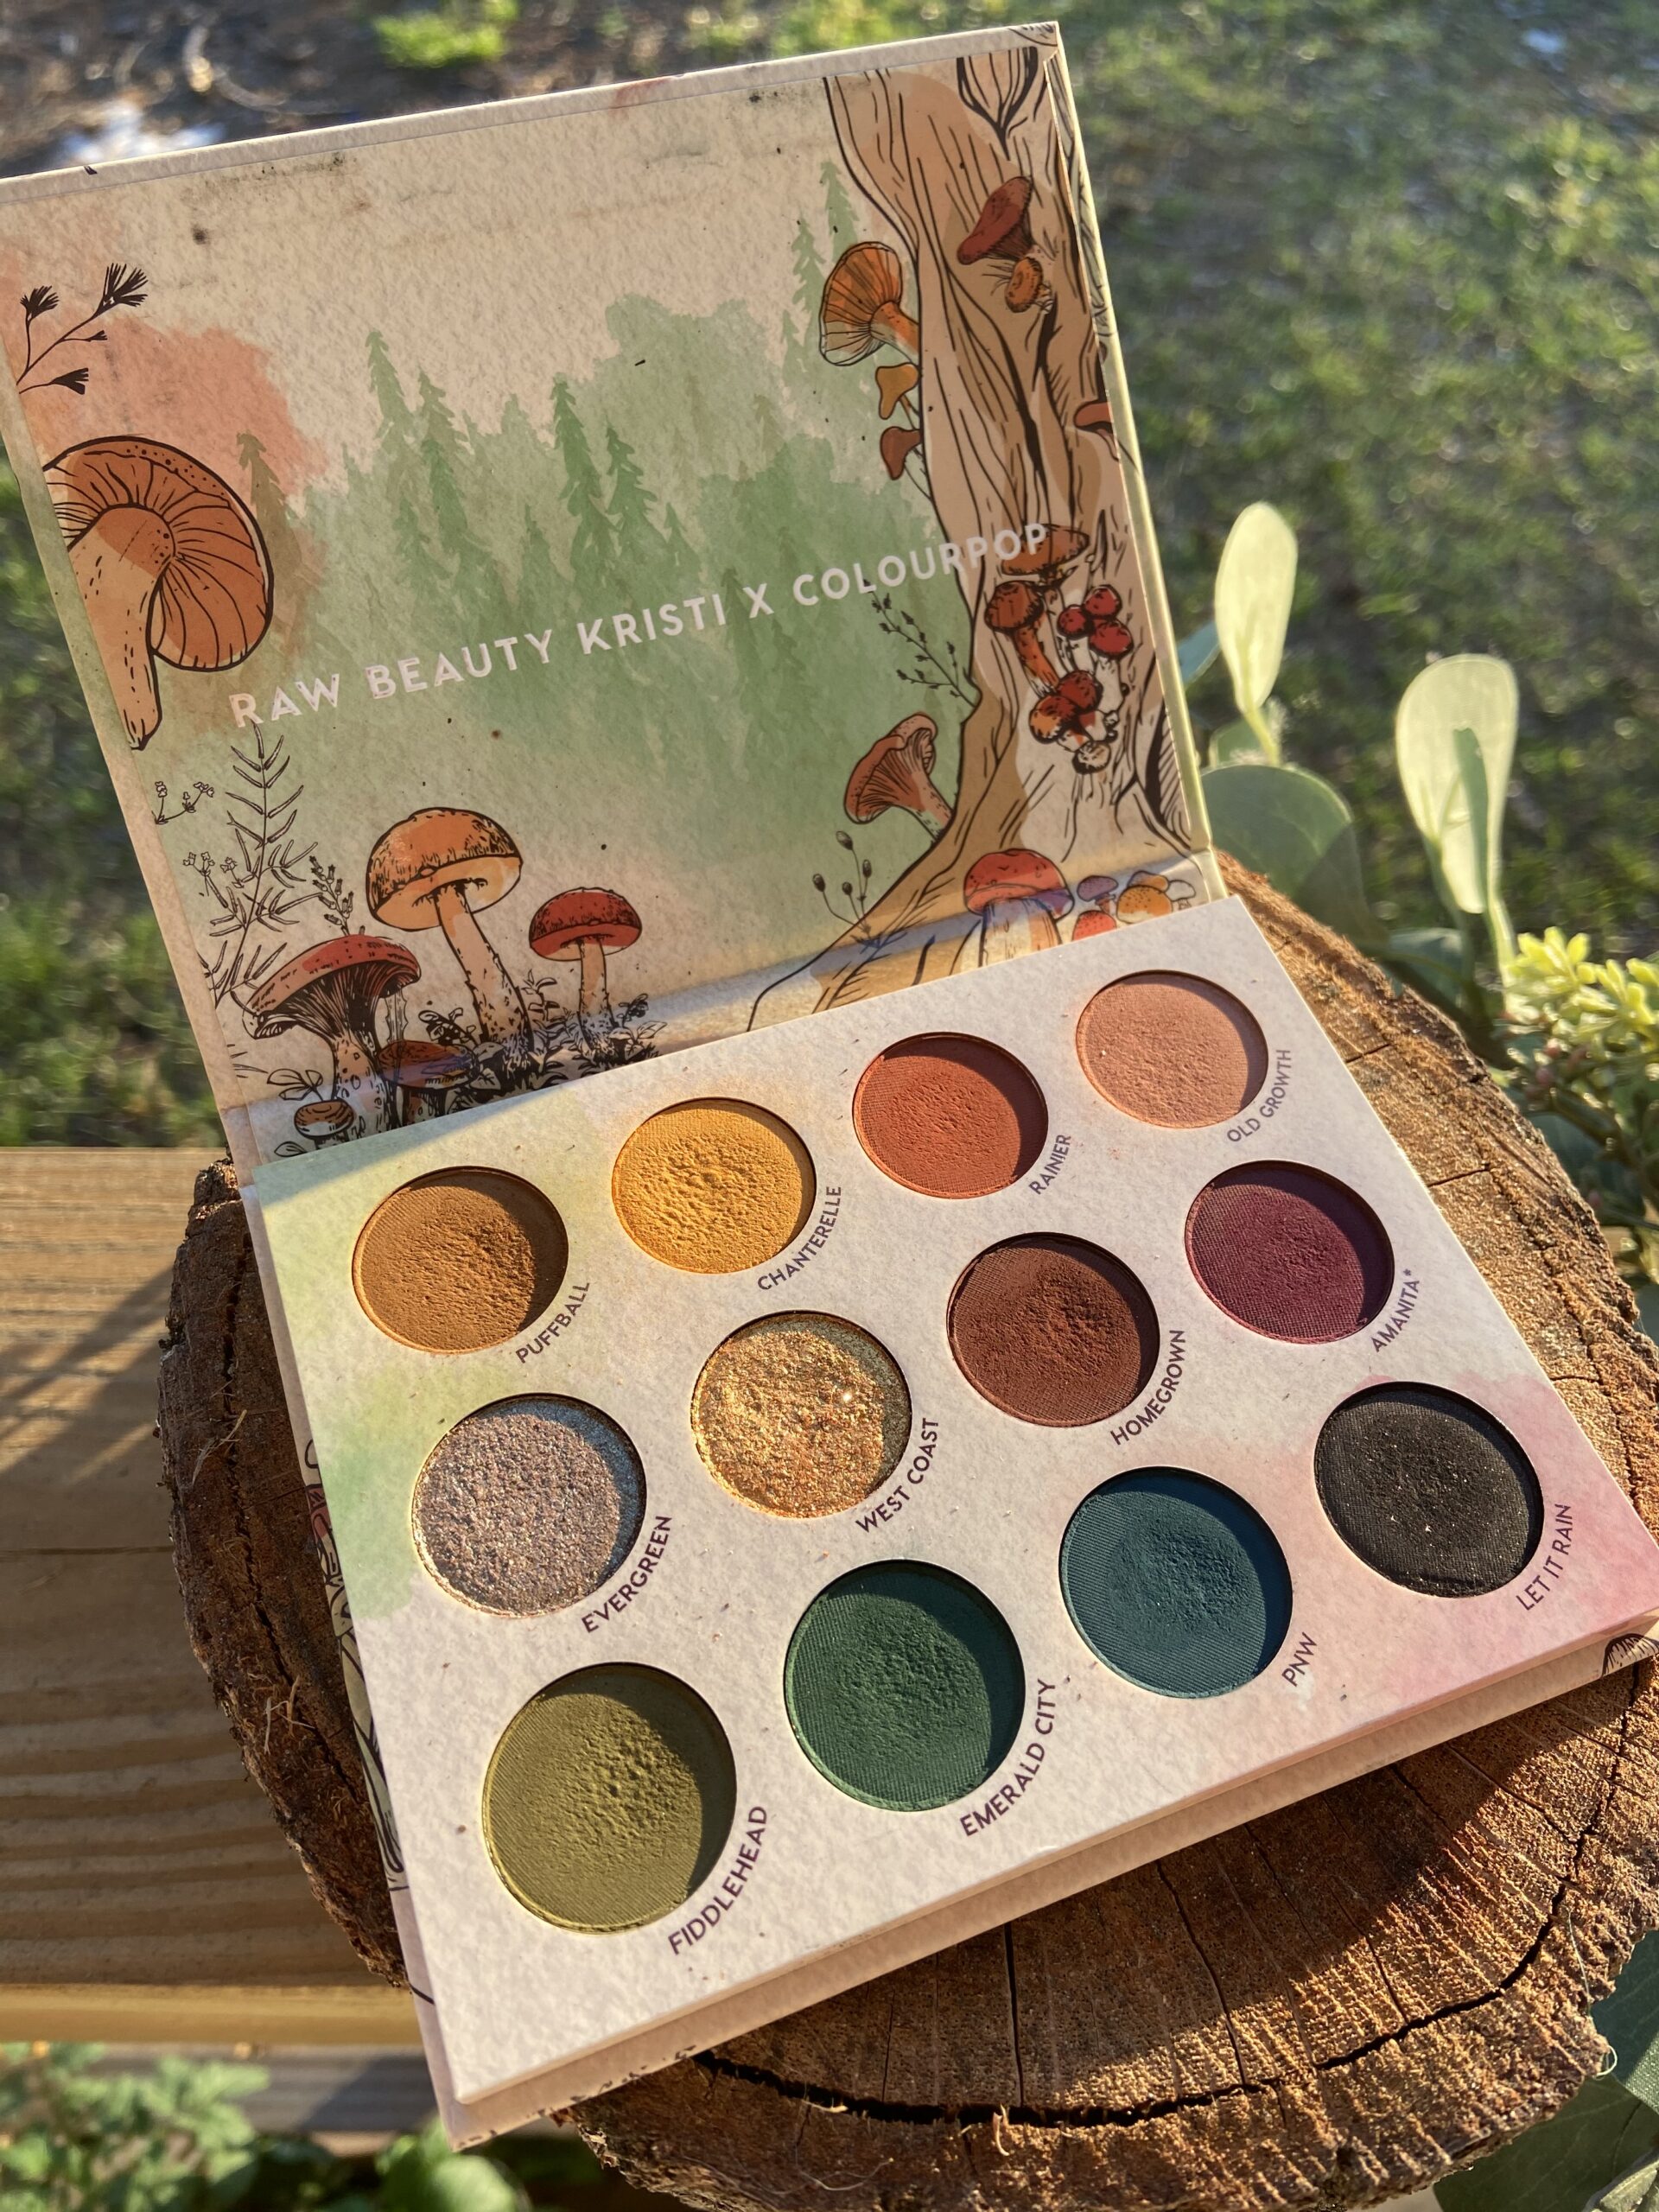 9 Products to Fall in Love with from the Raw Beauty Kristi x Colourpop Collaboration